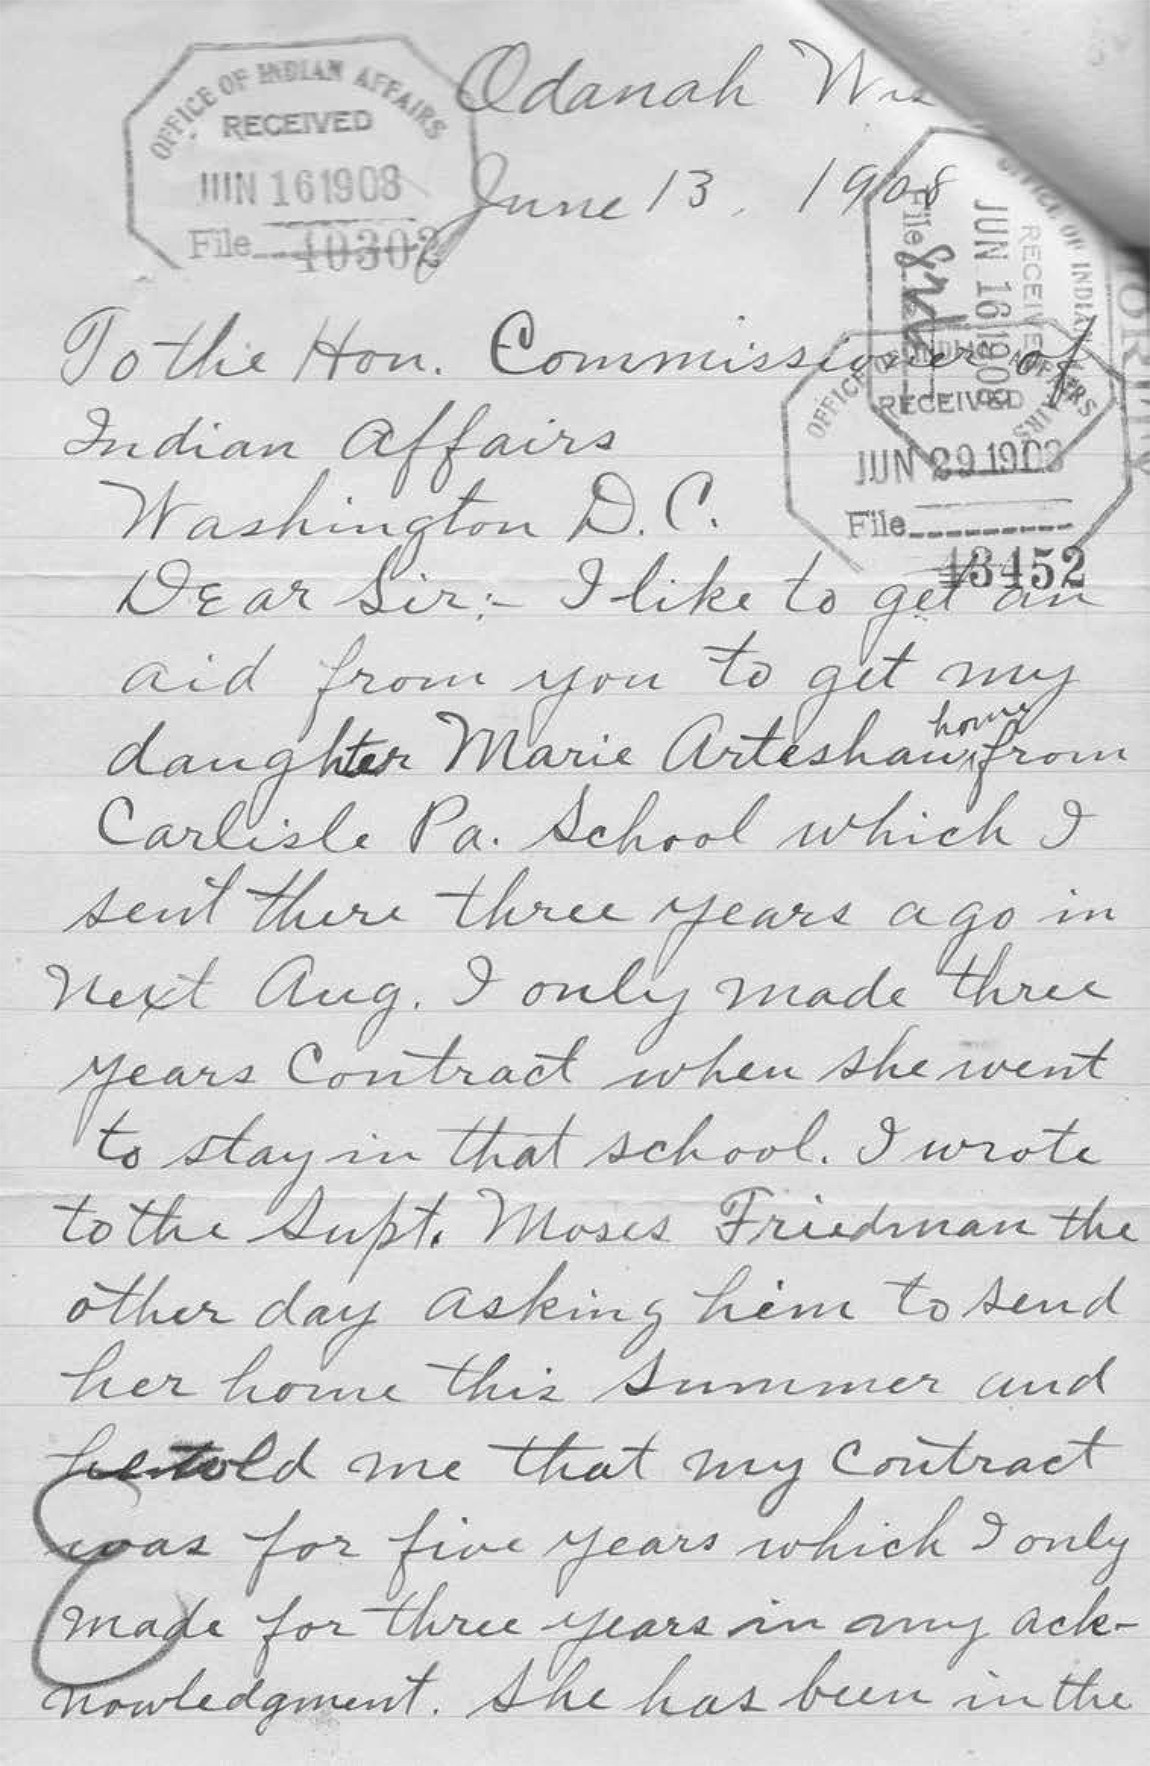 A letter in cursive written by a mother named Theresa Green from the Chippewa Nation to the commissioner of Indian Affairs asking that her daughter be sent home from the Carlisle School since her the 3-year contract there has passed.